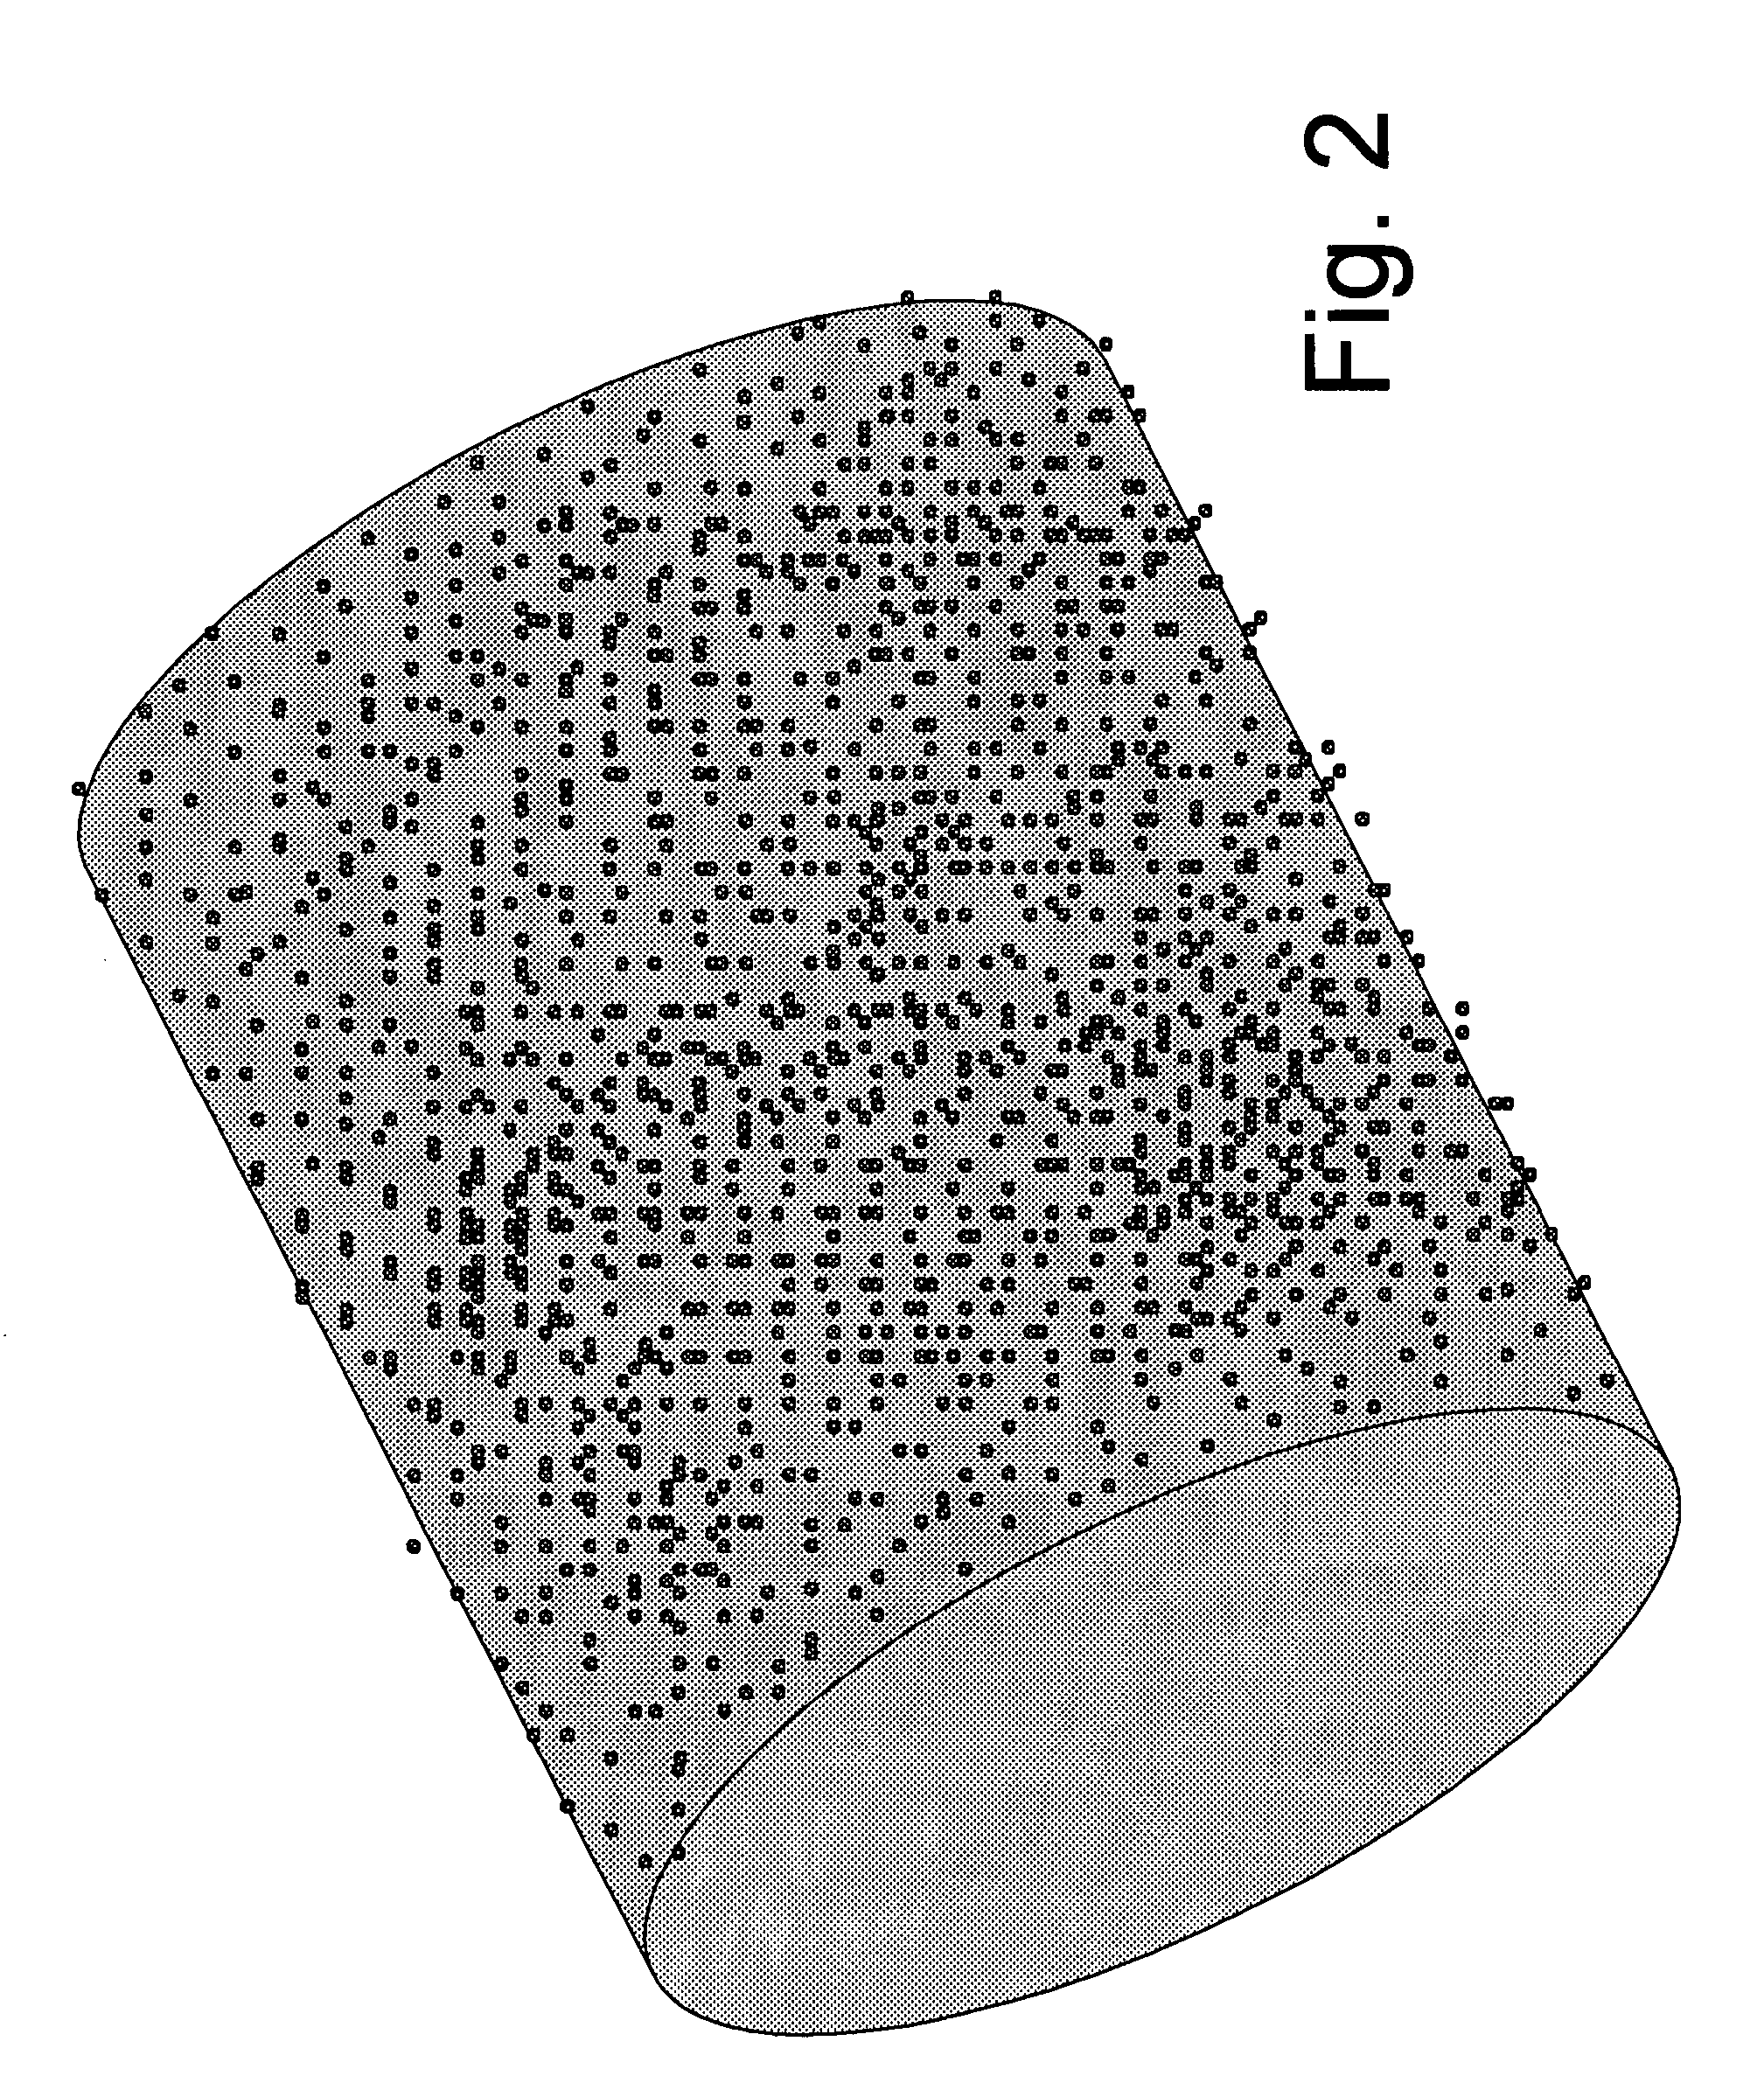 Porous friction material comprising nanoparticles of friction modifying material